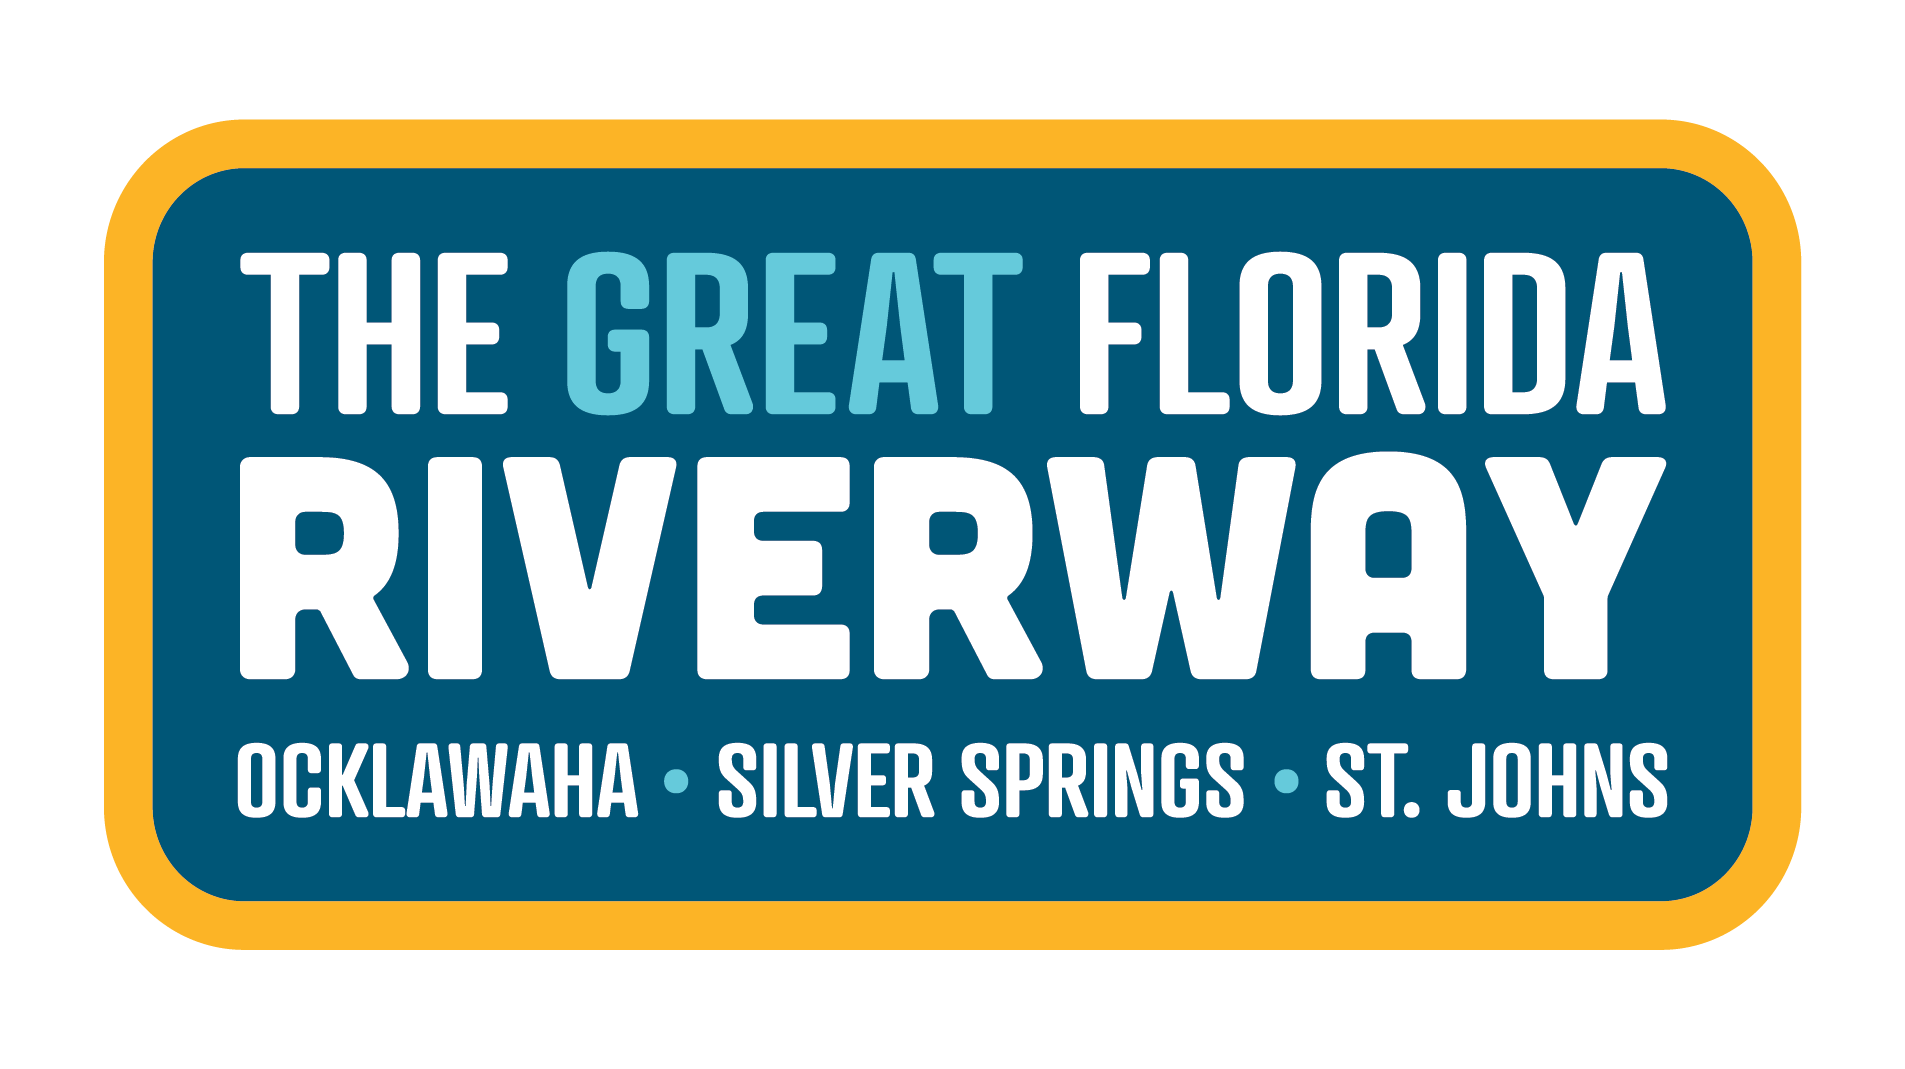 The Great Florida Riverway